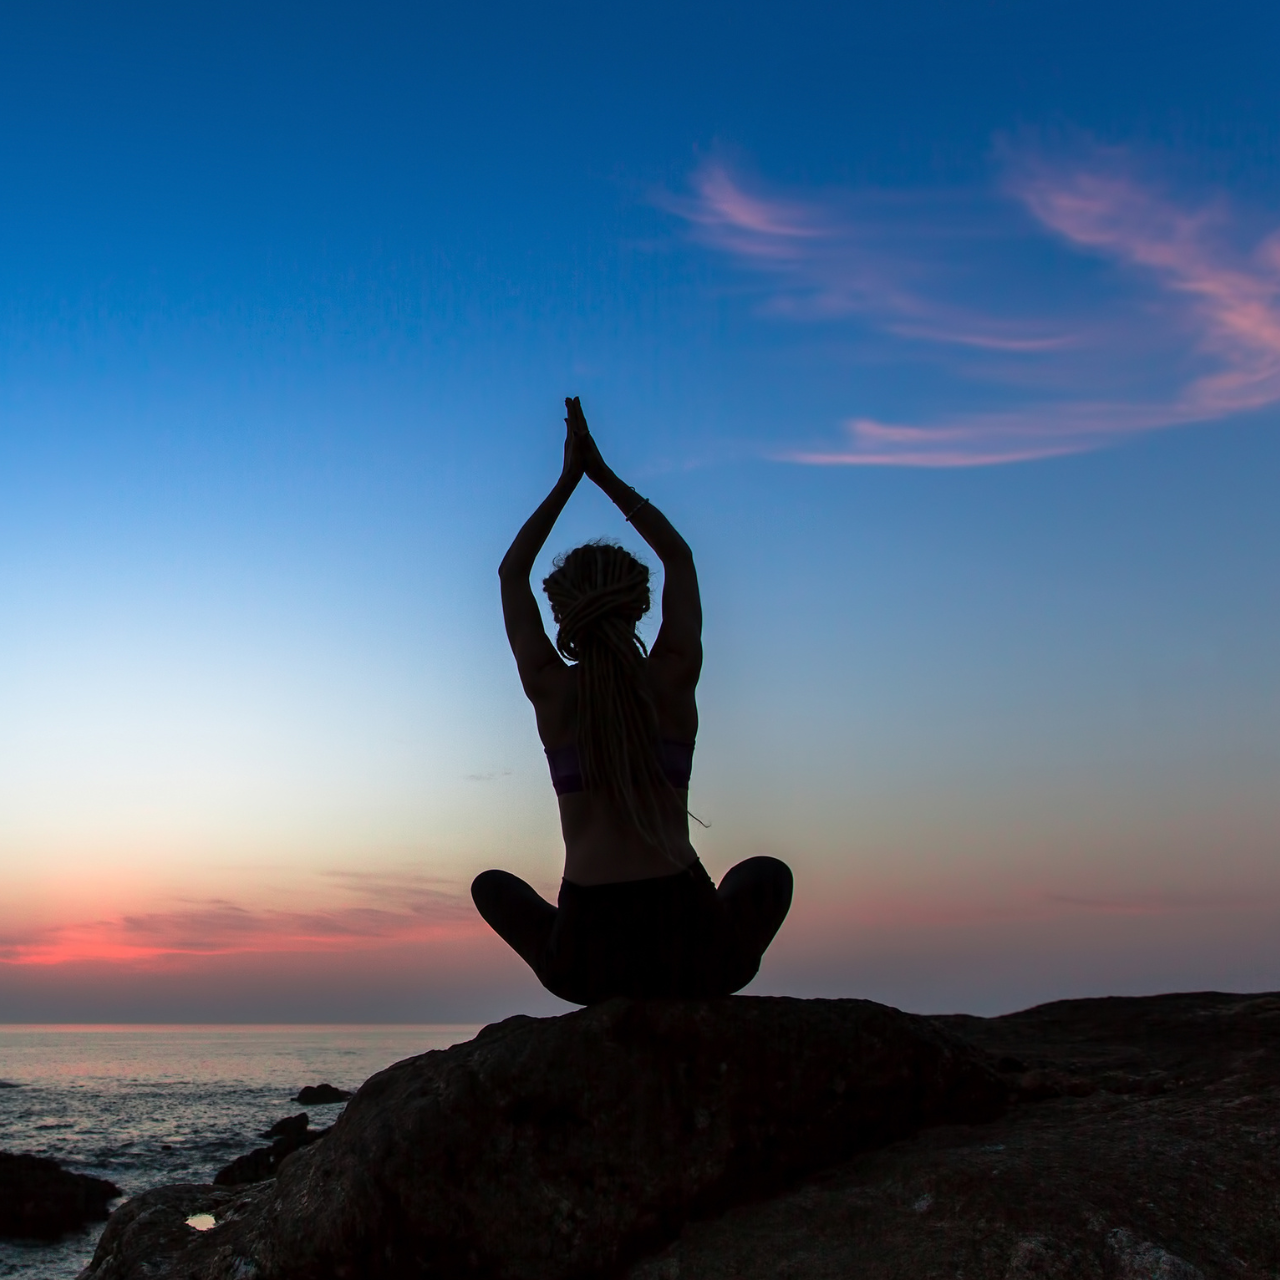 Silhouette of a young woman practicing yoga exercises on the ocean at twilight.